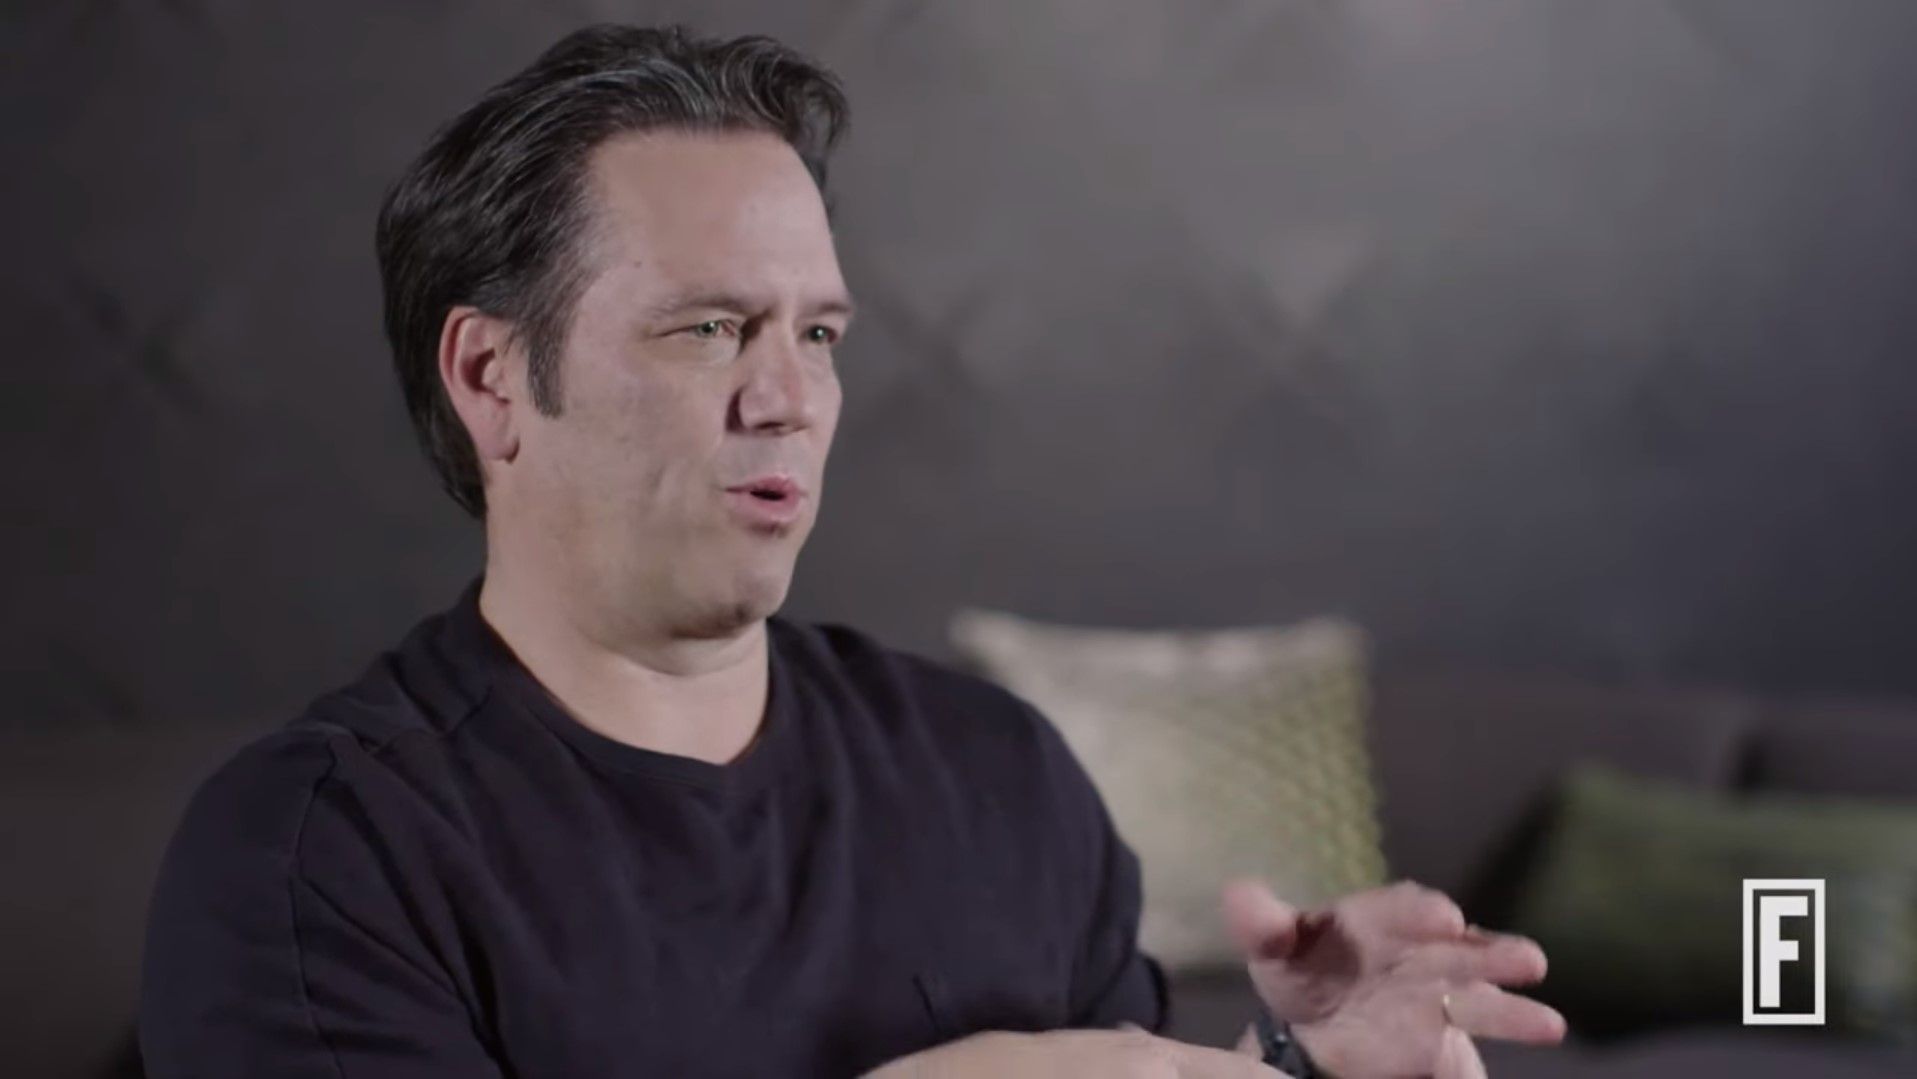 Xbox Boss Phil Spencer Opens Up About Working With Sony One Esports